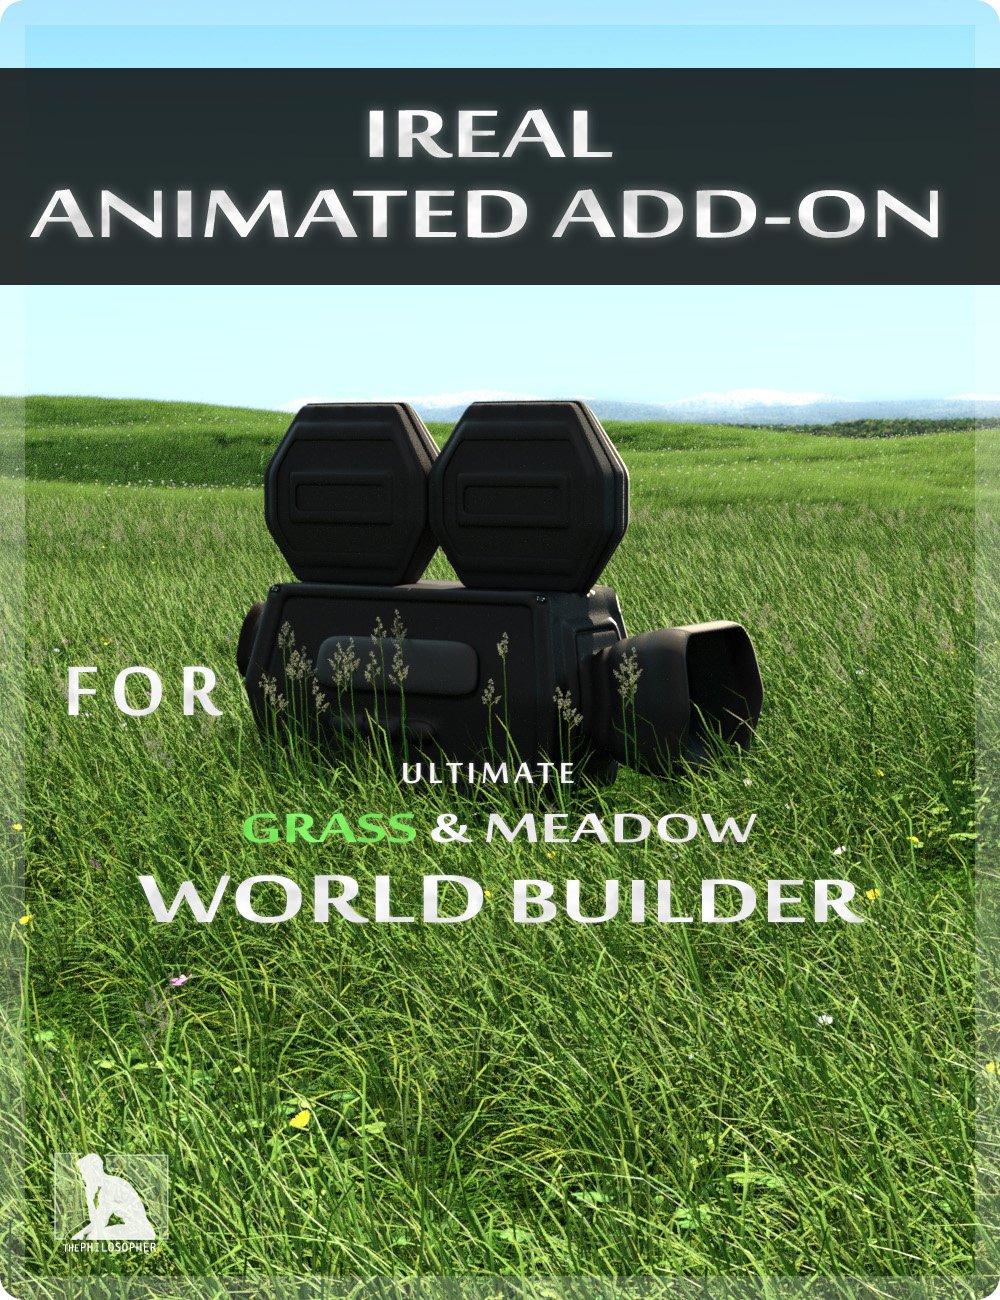 iREAL Animated Add-on for ULTIMATE Grass & Meadow by: ThePhilosopher, 3D Models by Daz 3D